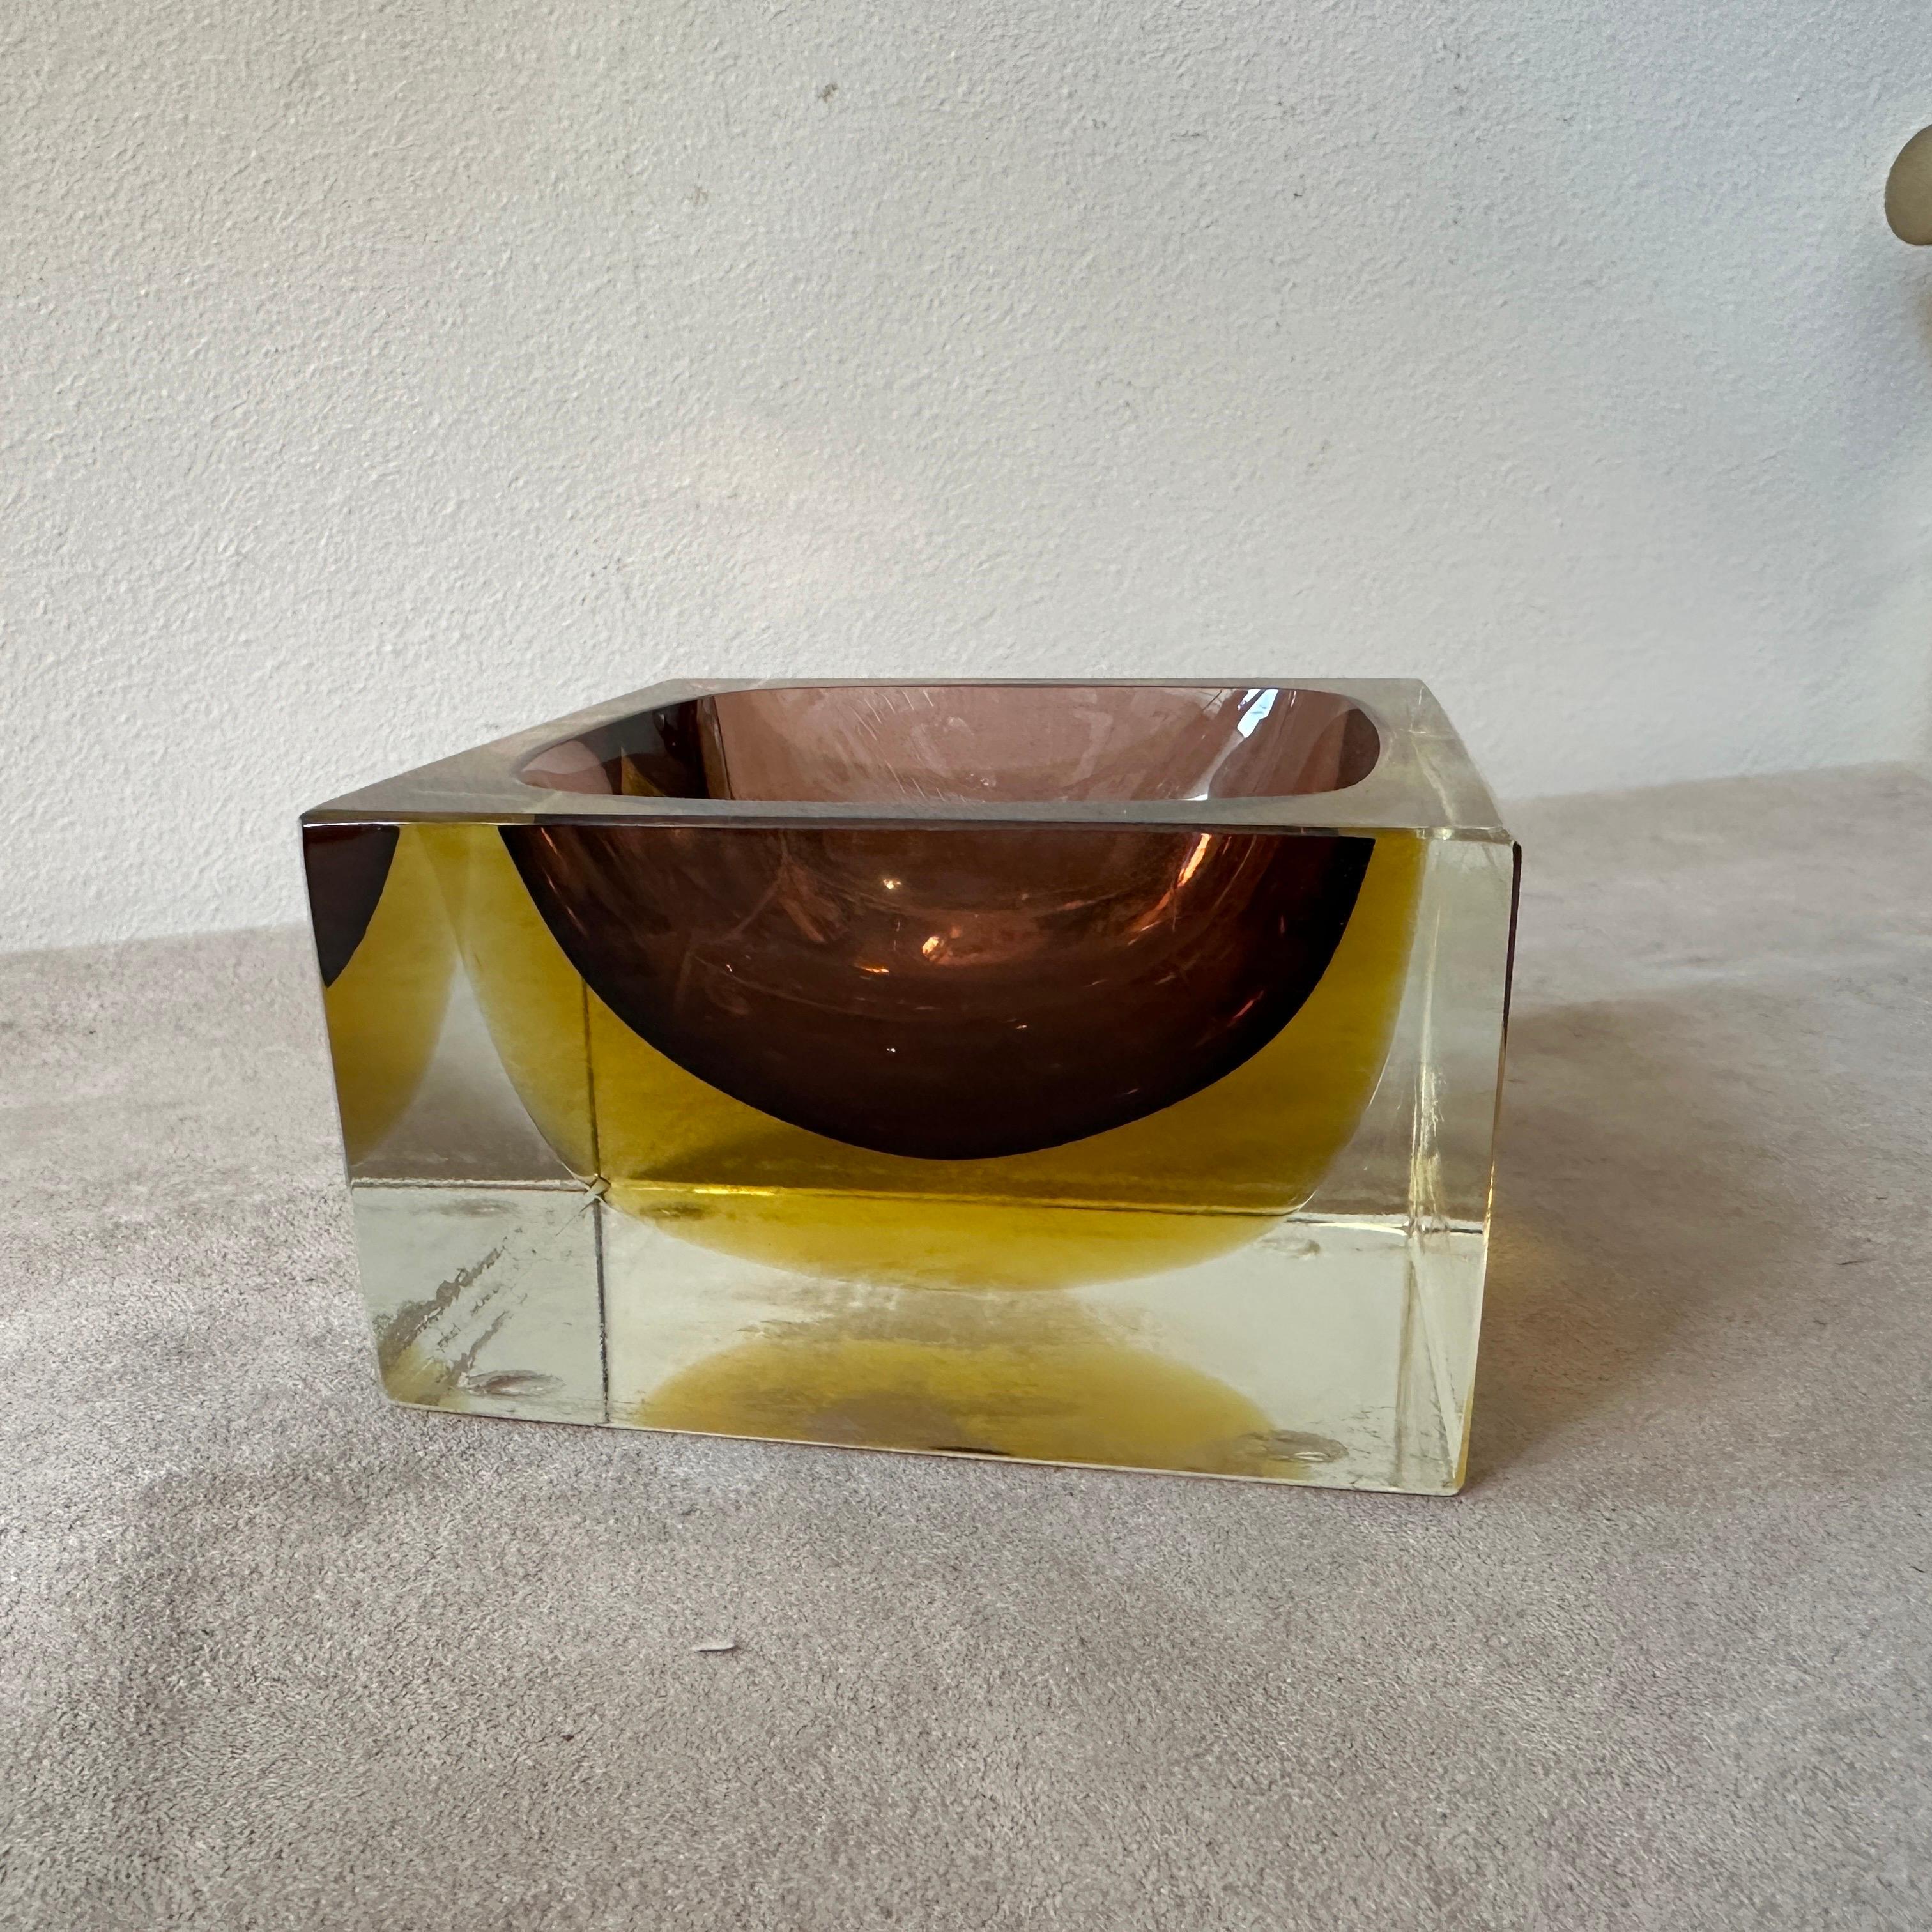 1970s Modernist Yellow and Brown Sommerso Murano Glass Ashtray by Mandruzzato For Sale 2